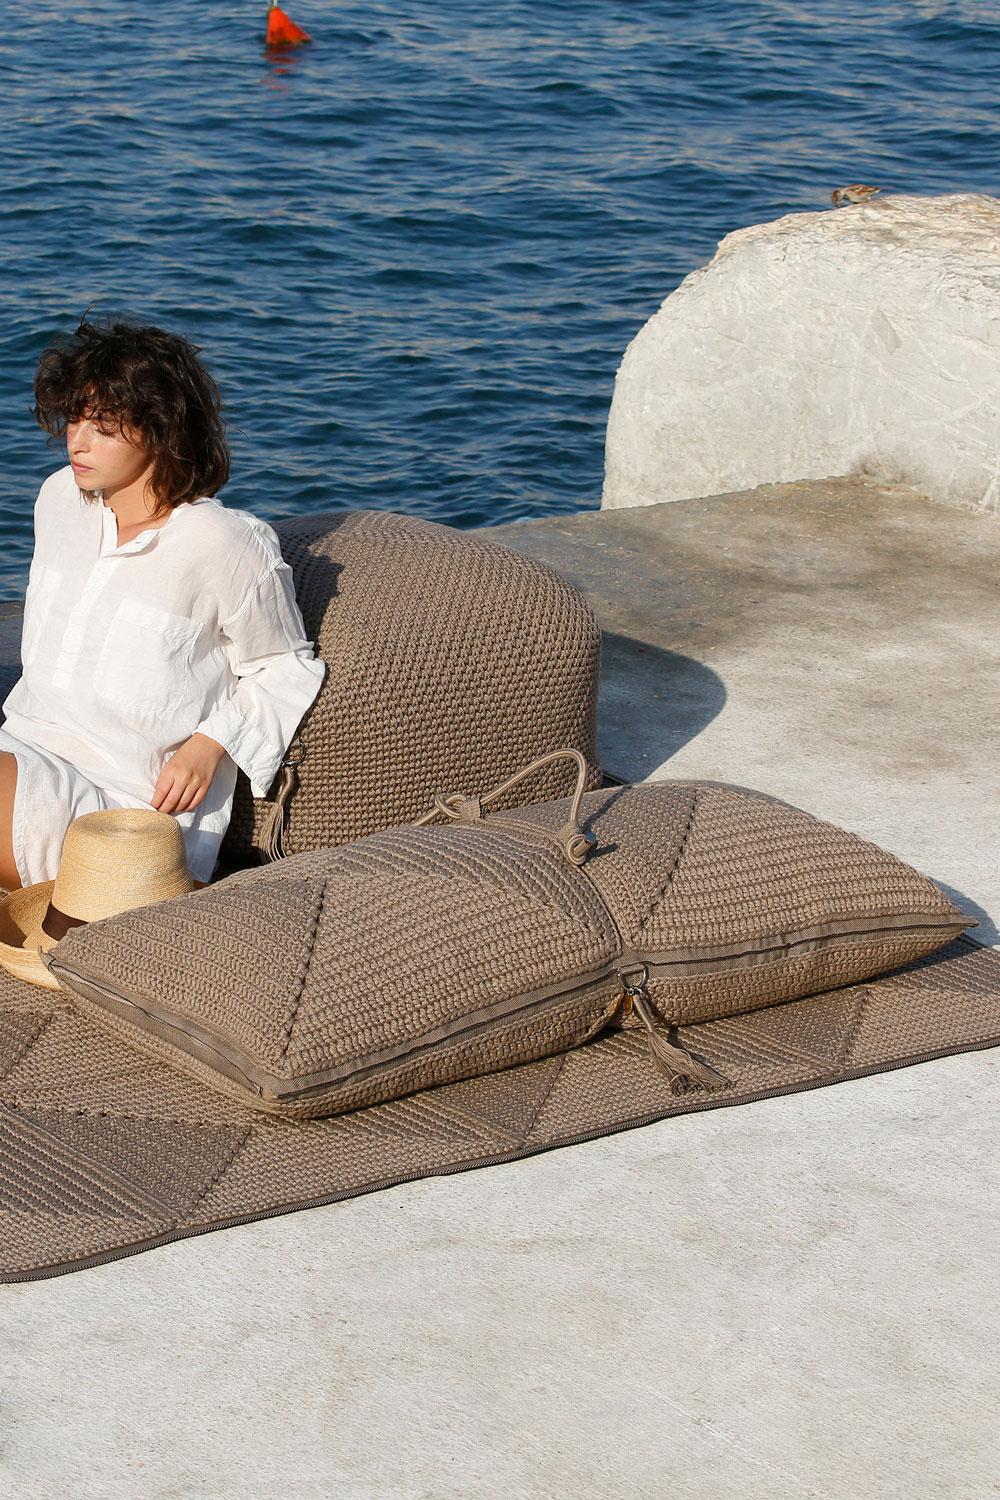 The Classic crochet granny square takes a contemporary twist in this large floor cushion. Four squares form the cushion which are than sewn together with bespoke outdoor webbing. It explores the aesthetics of nomads and wants to live both inside and